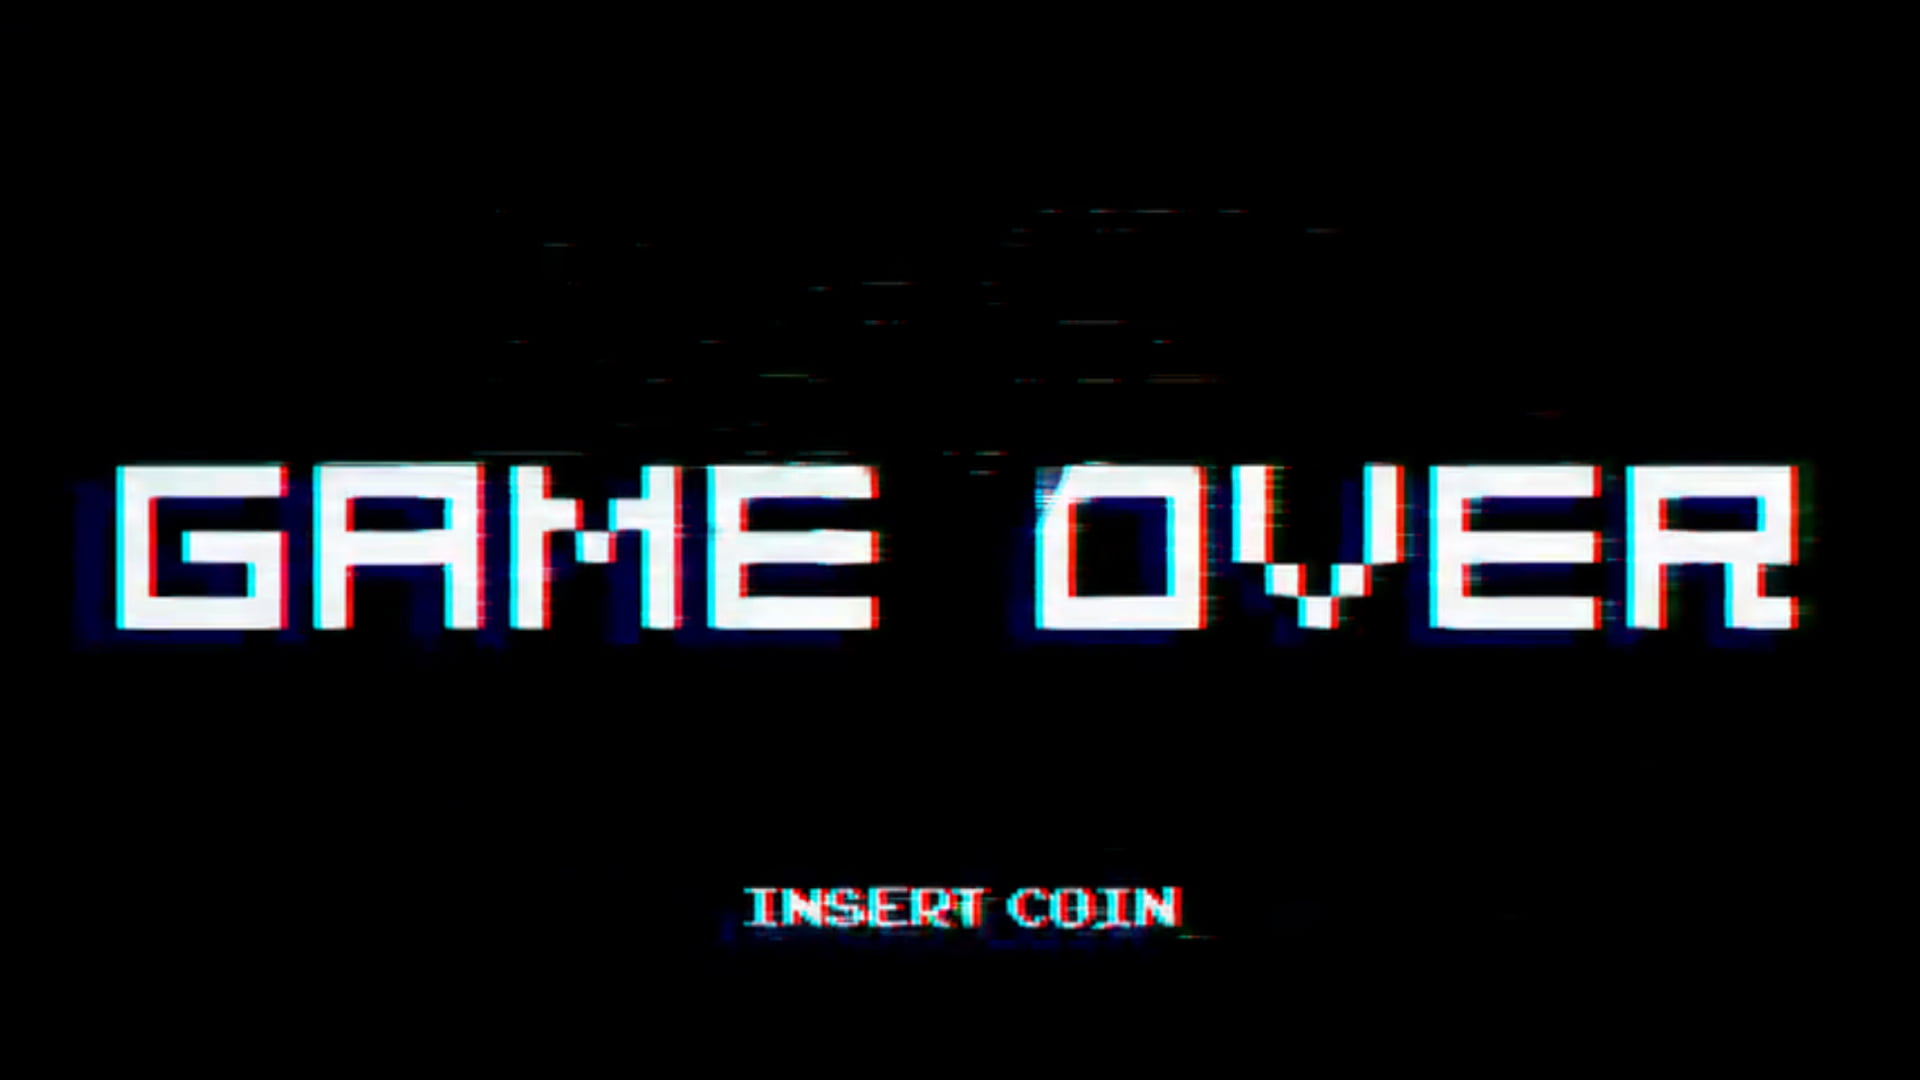  Game  application wallpaper  arcade GAME  OVER  video 